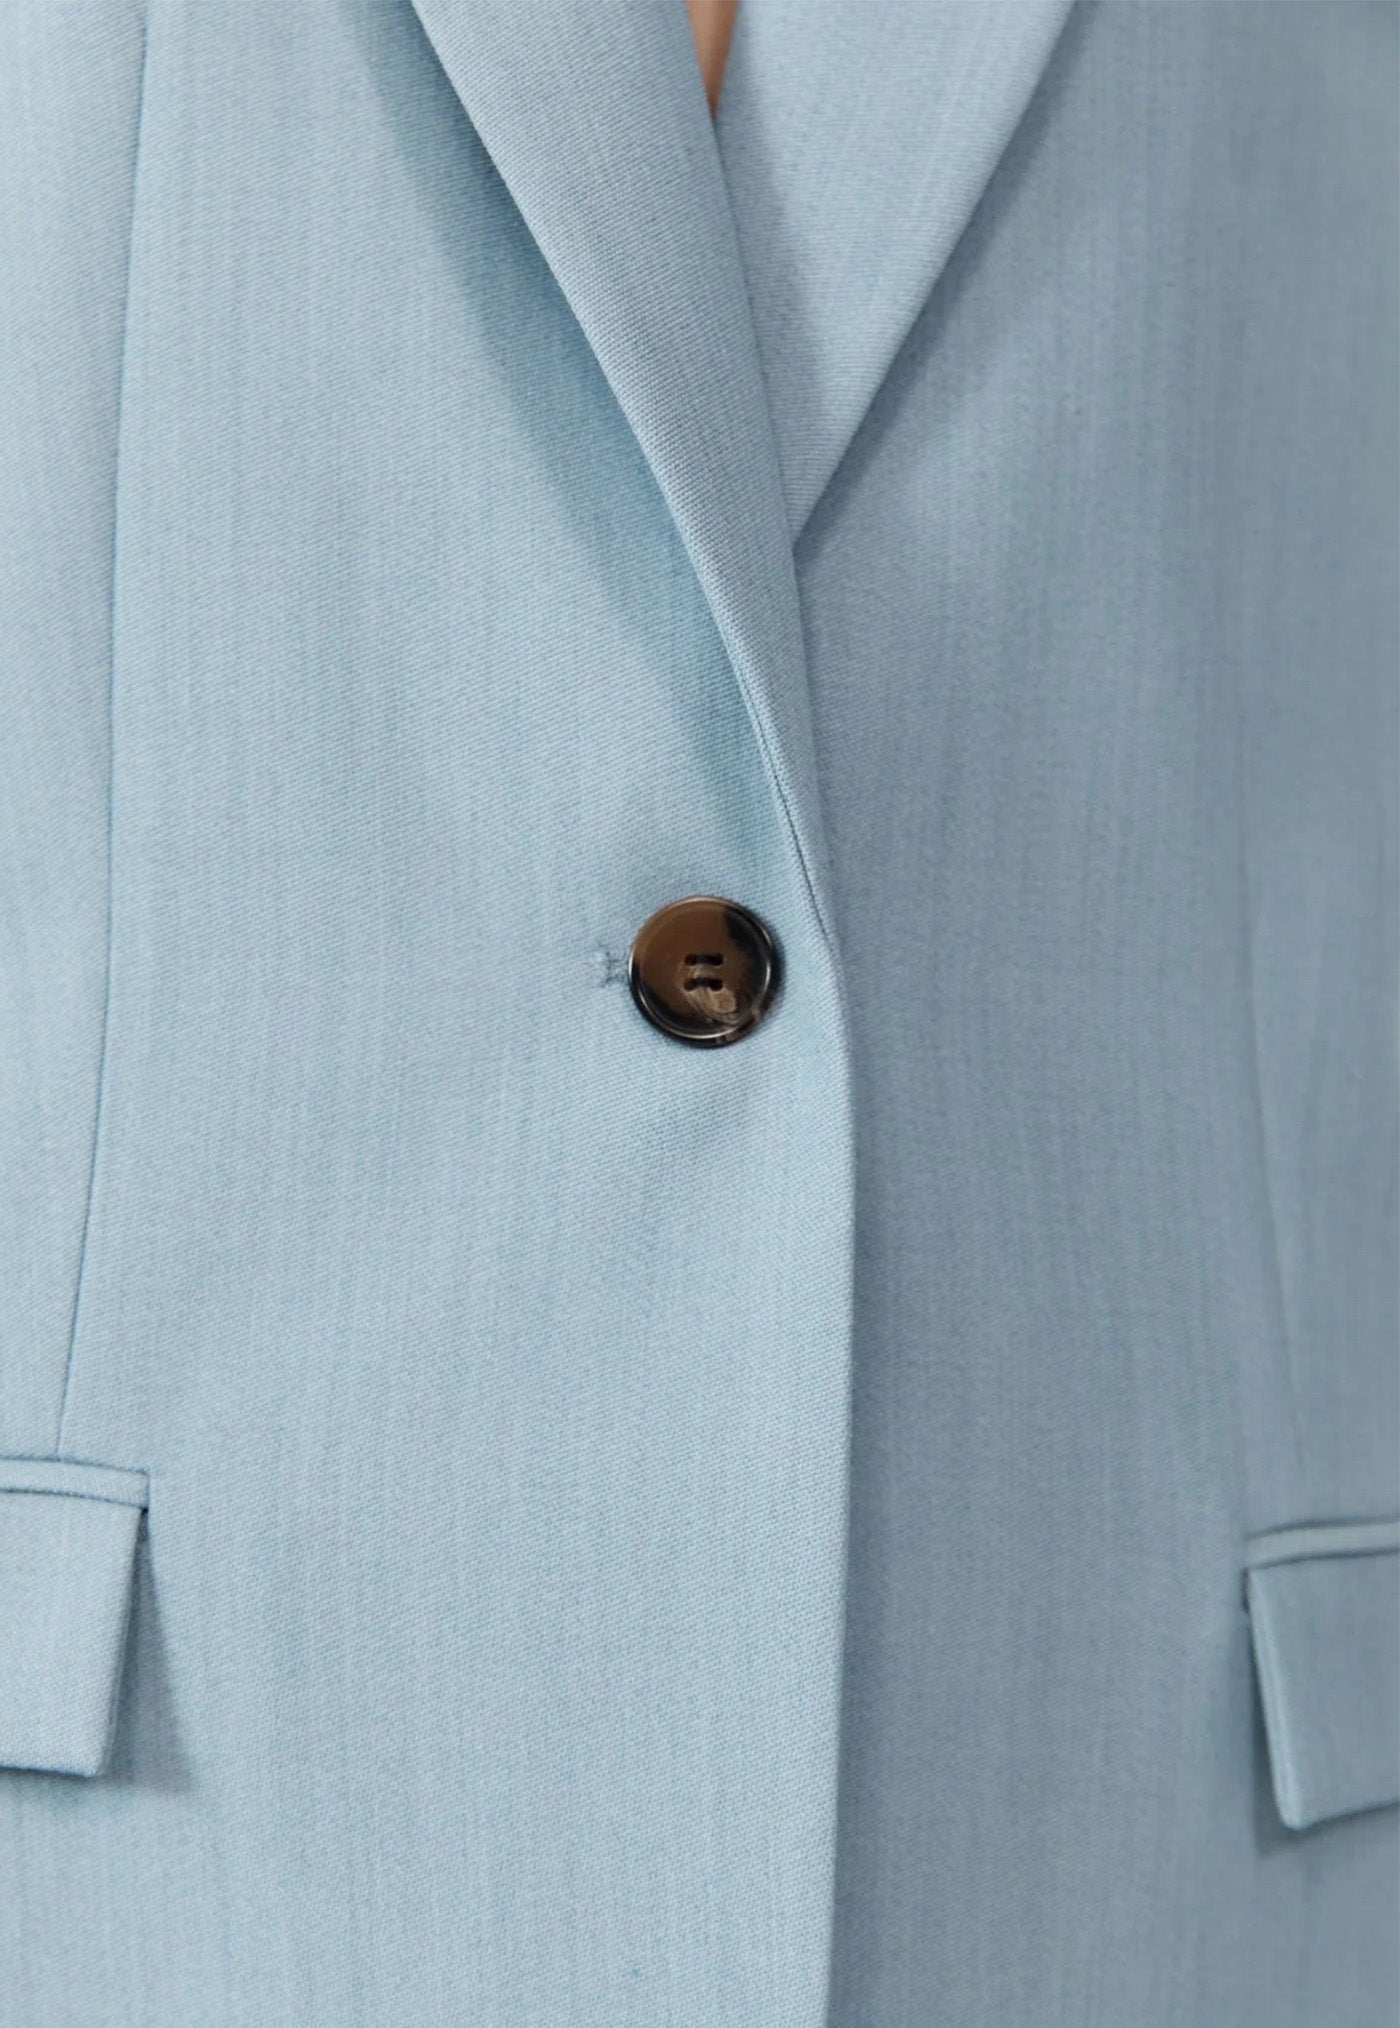 Single Button Tailored Blazer - Stone Blue sold by Angel Divine